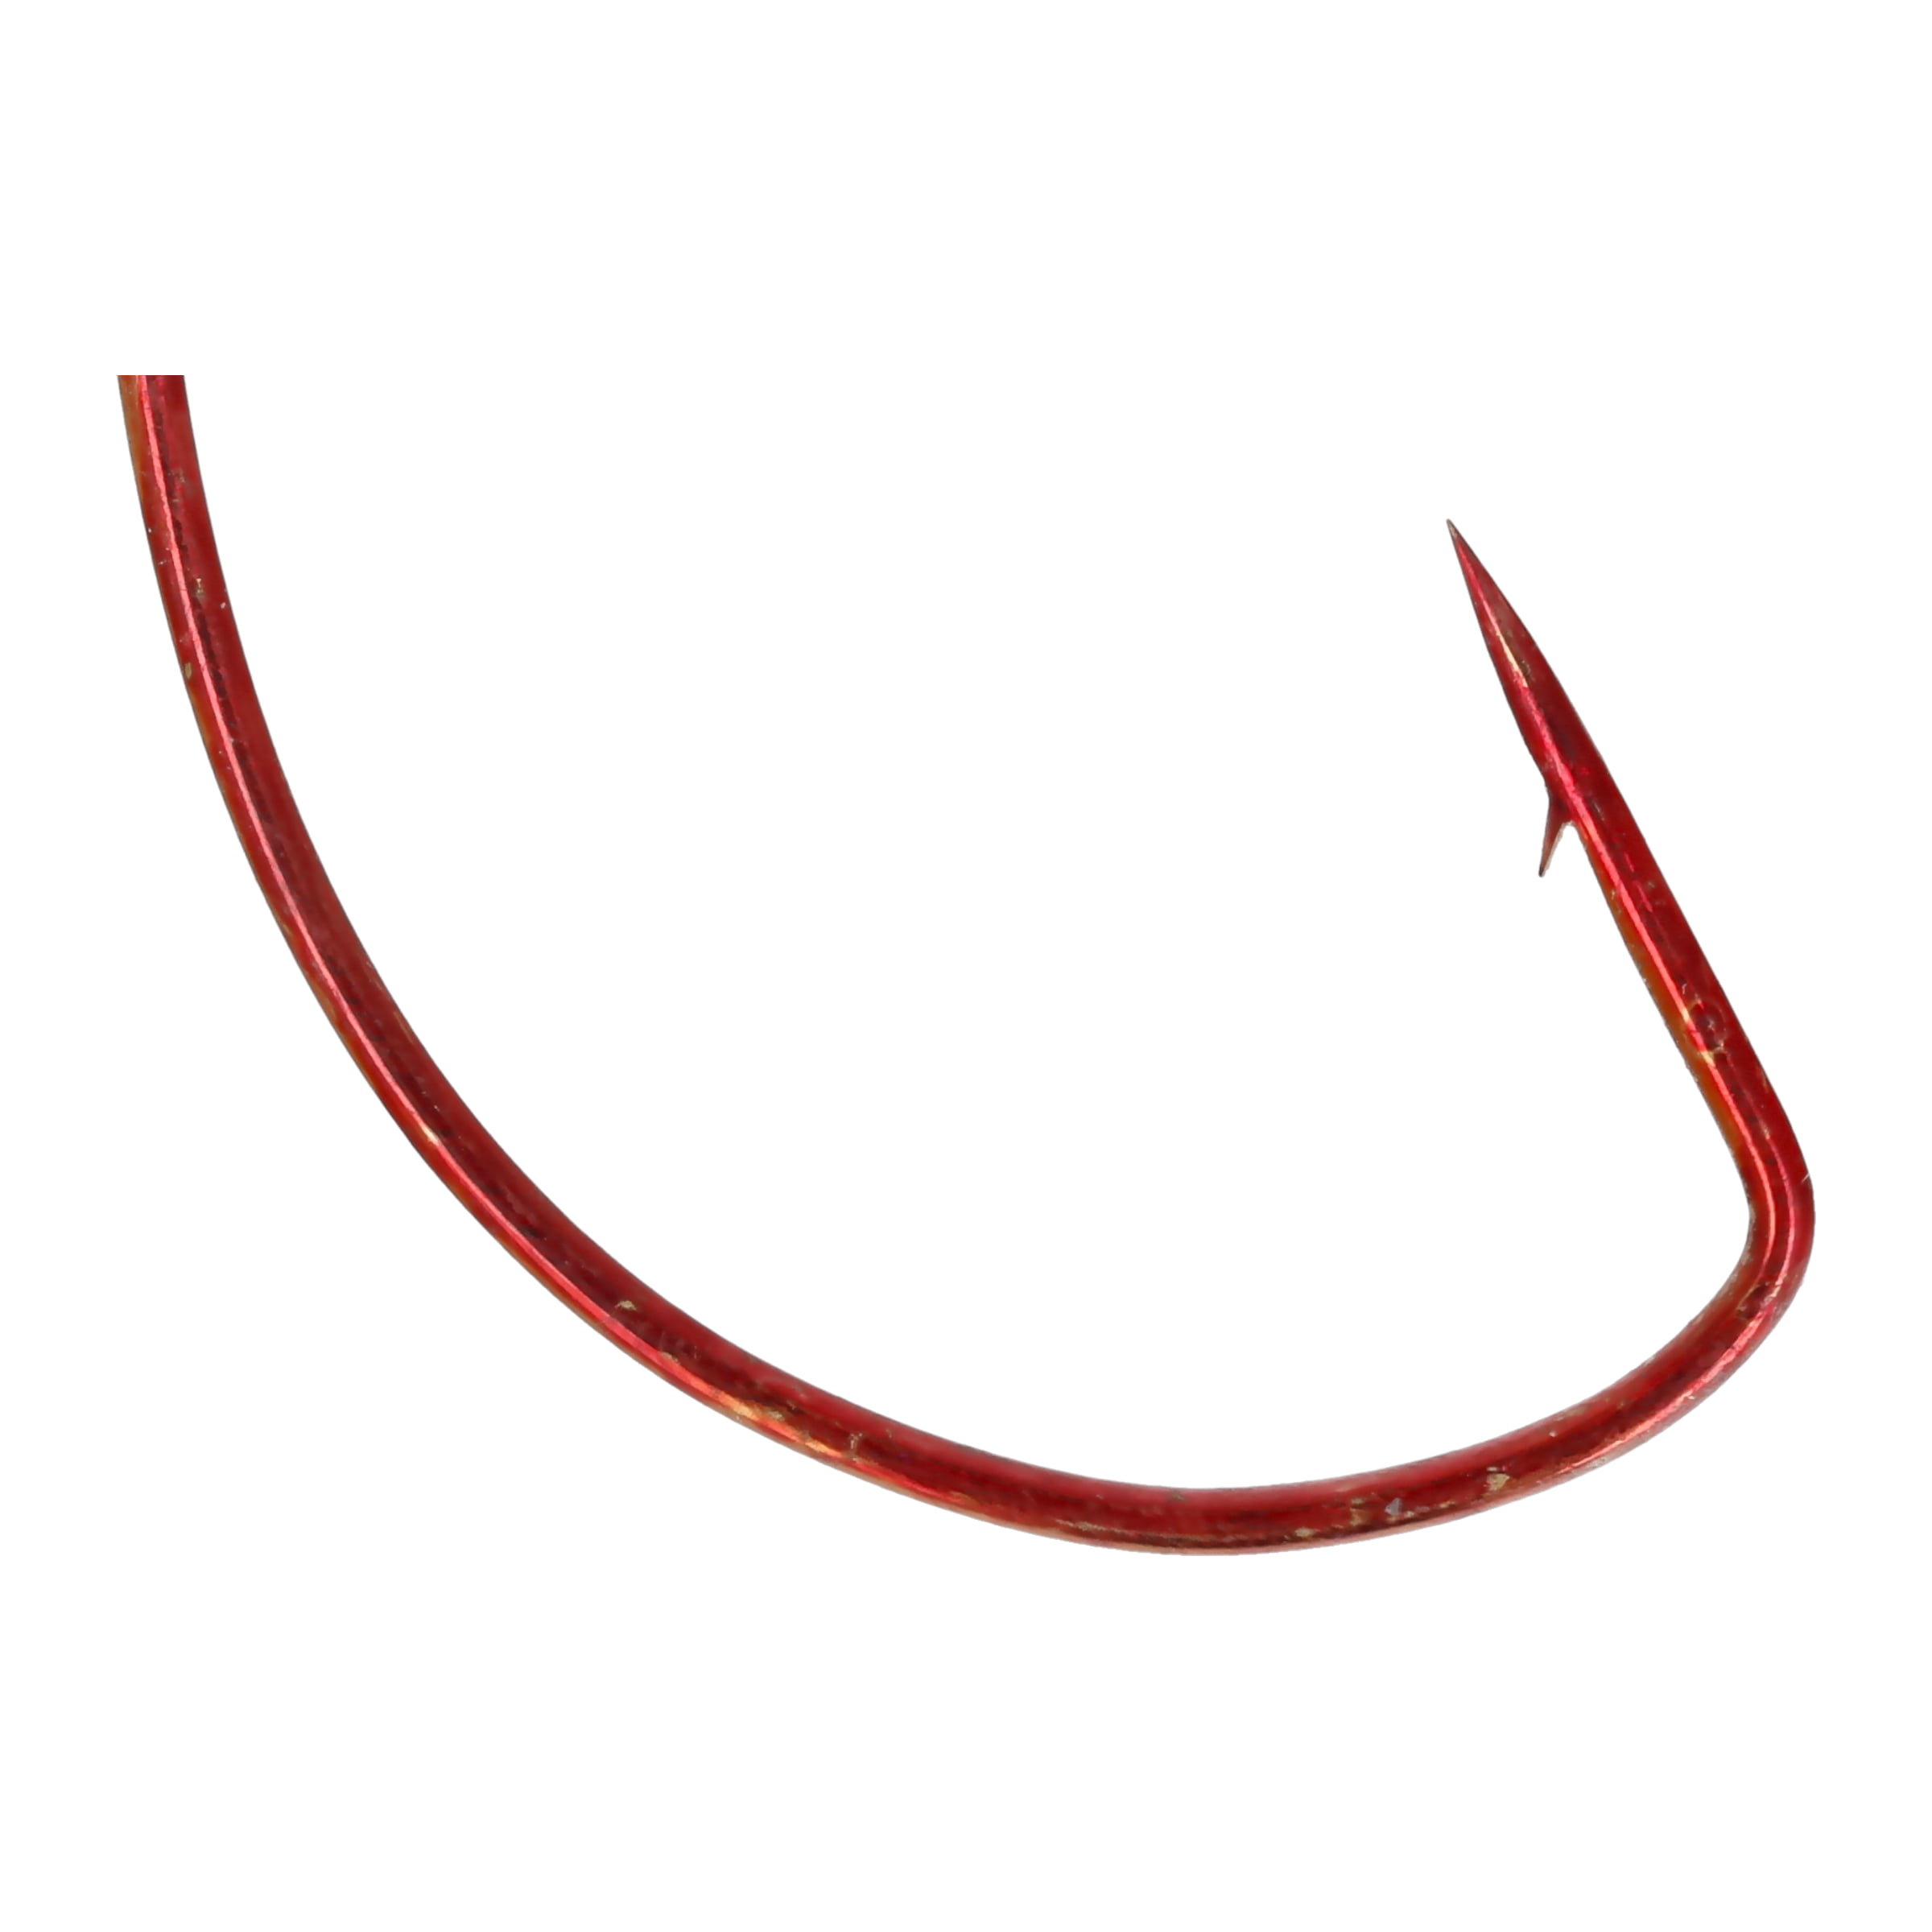 Eagle Claw Weighted Fishing Hook, Unpainted, 1/8 oz. 